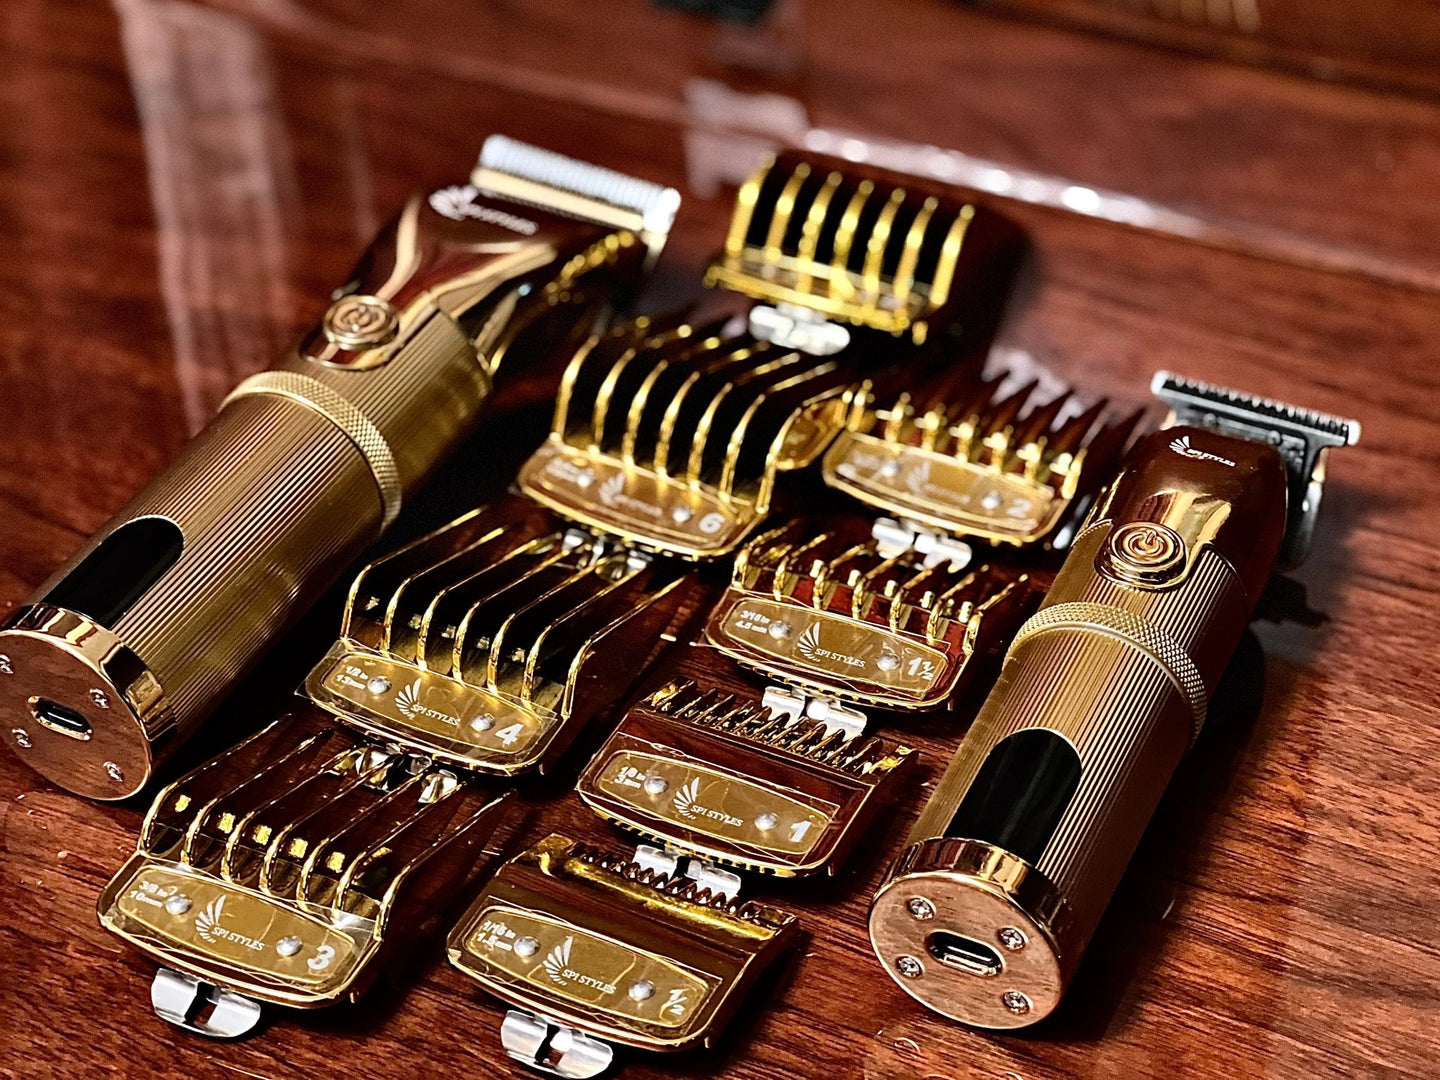 Luxury Gold 10 pcs Set Hair Comb Guides (CLIPPERS NOT INCLUDED)